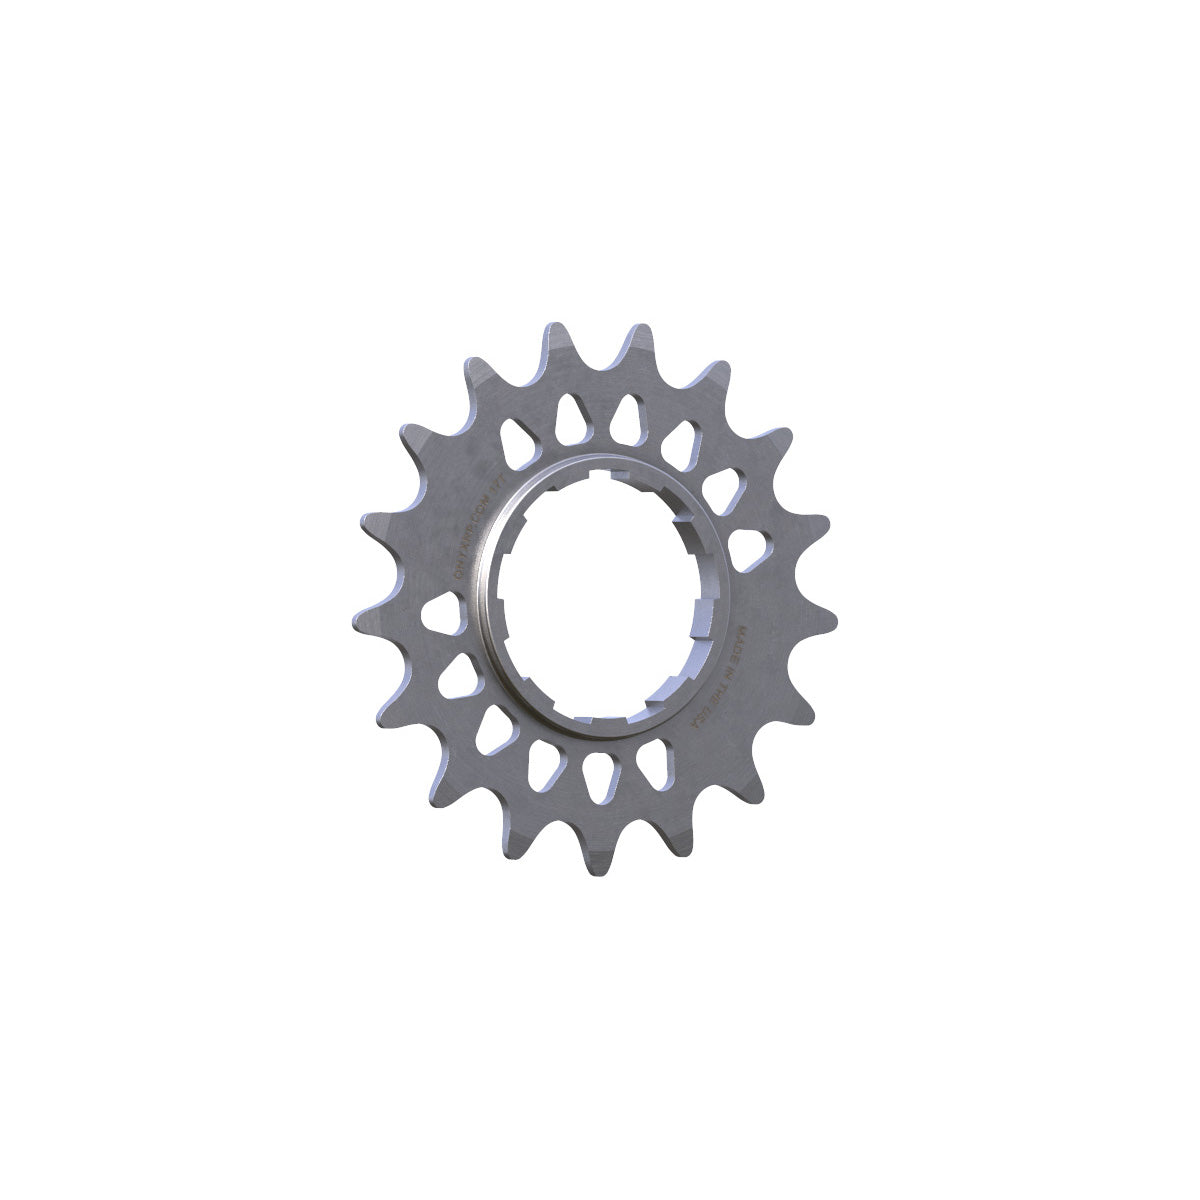 Onyx Racing 17t Stainless Steel Cog for BMX Cassette hubs - 3/32"